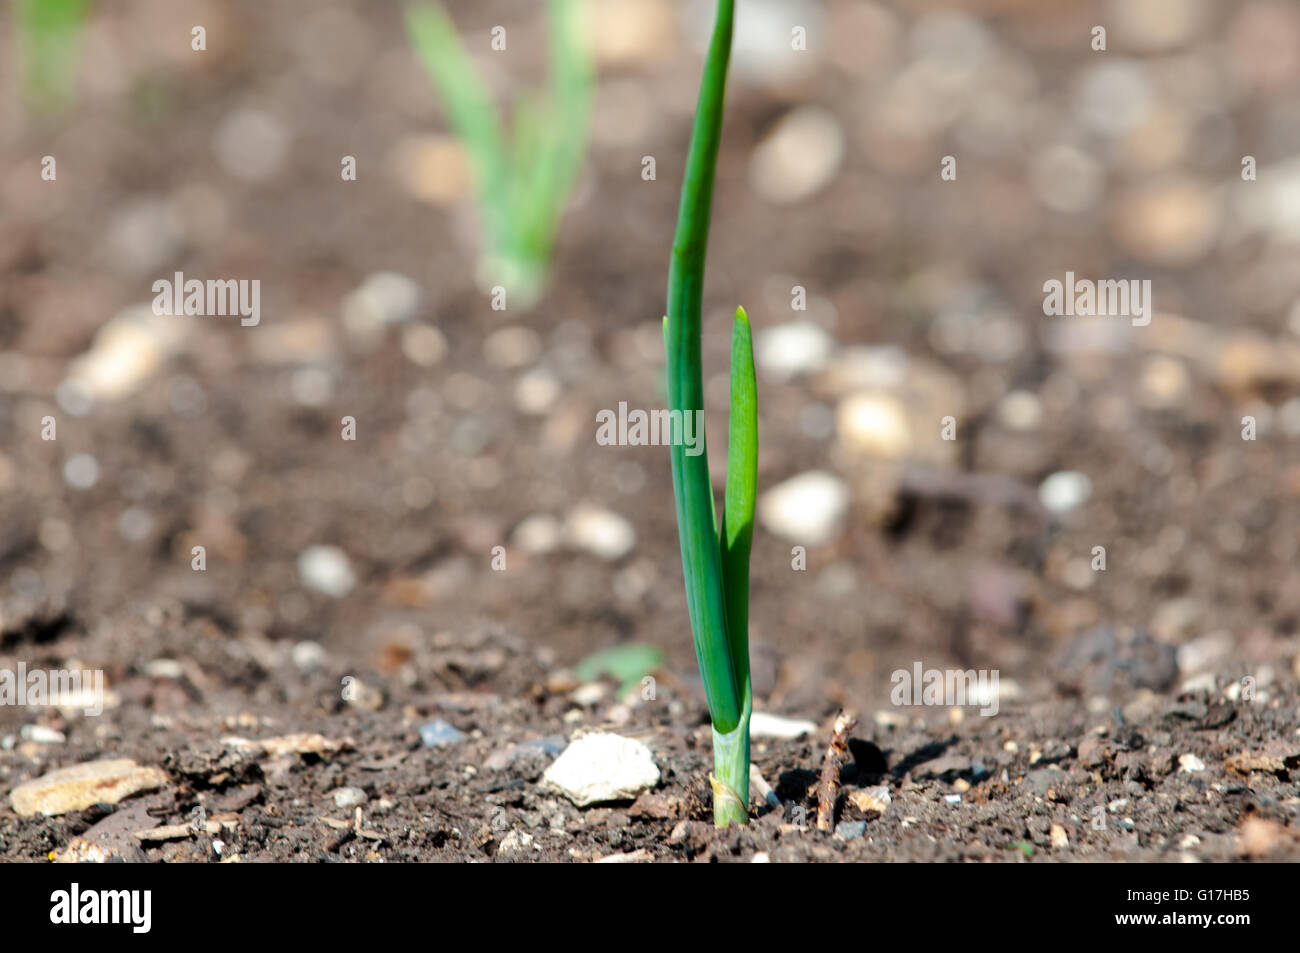 Small green plant shoot growing from dry soil, concept for new beginnings Stock Photo